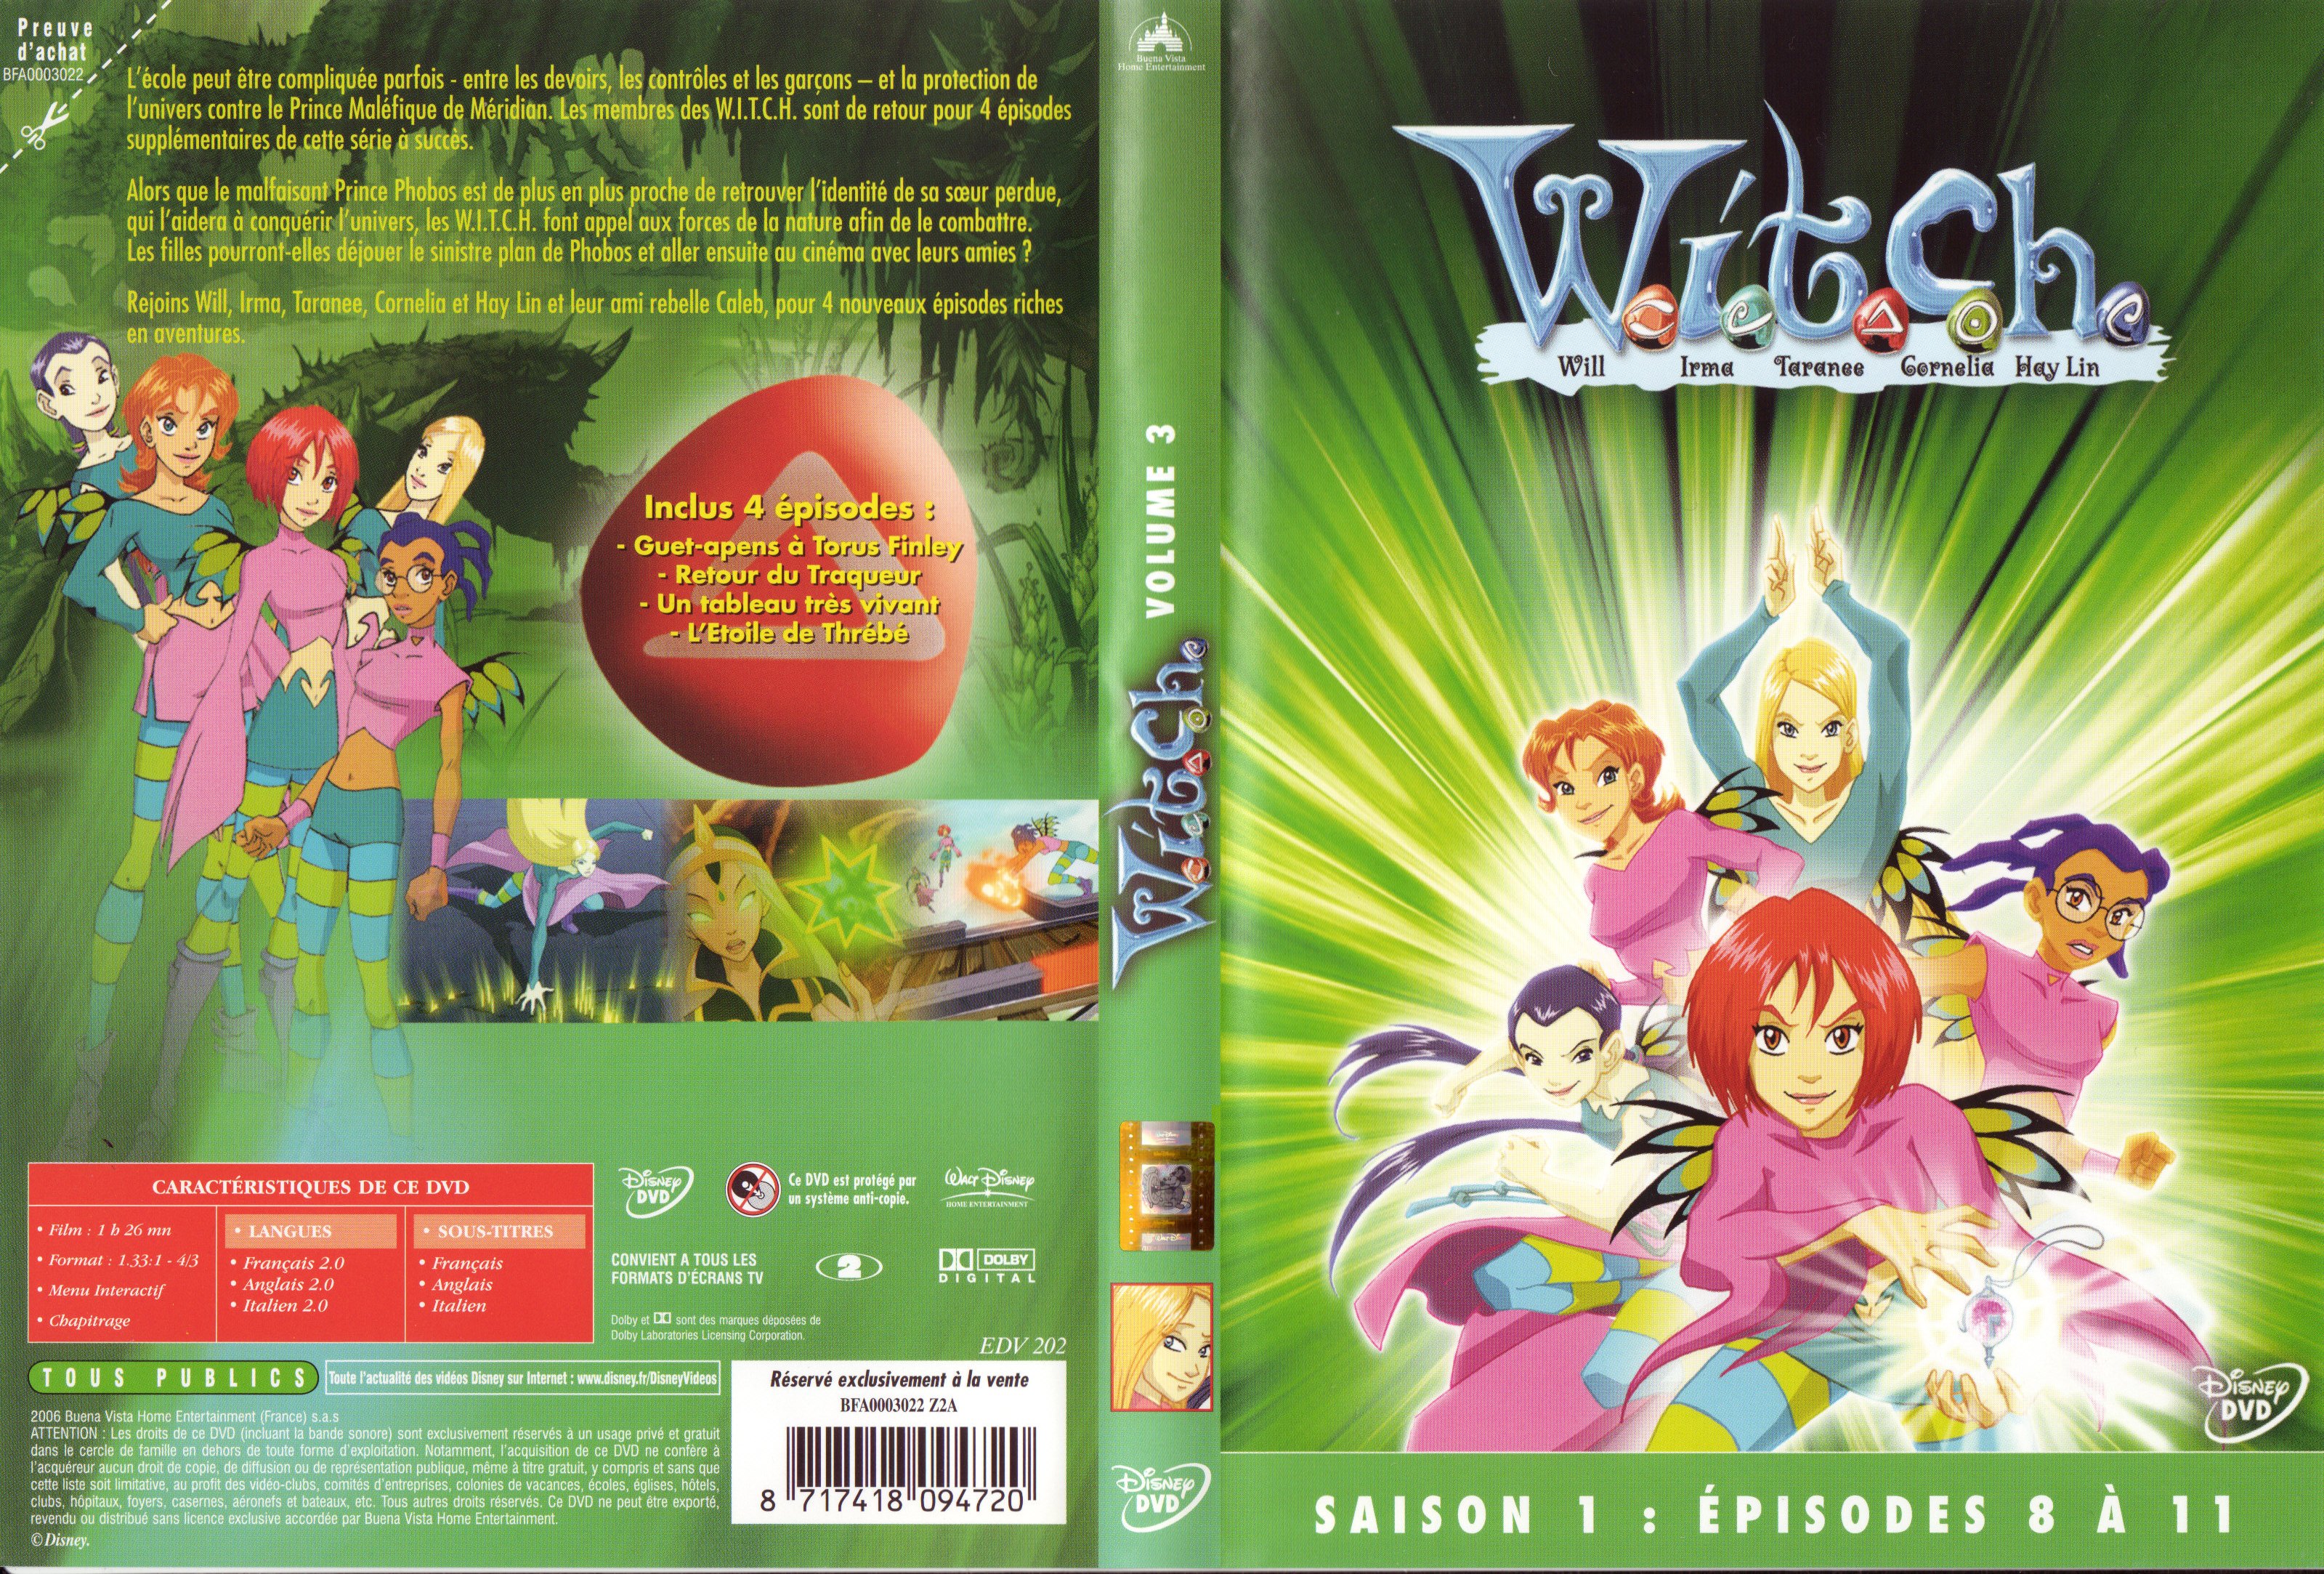 Jaquette DVD Witch vol 3